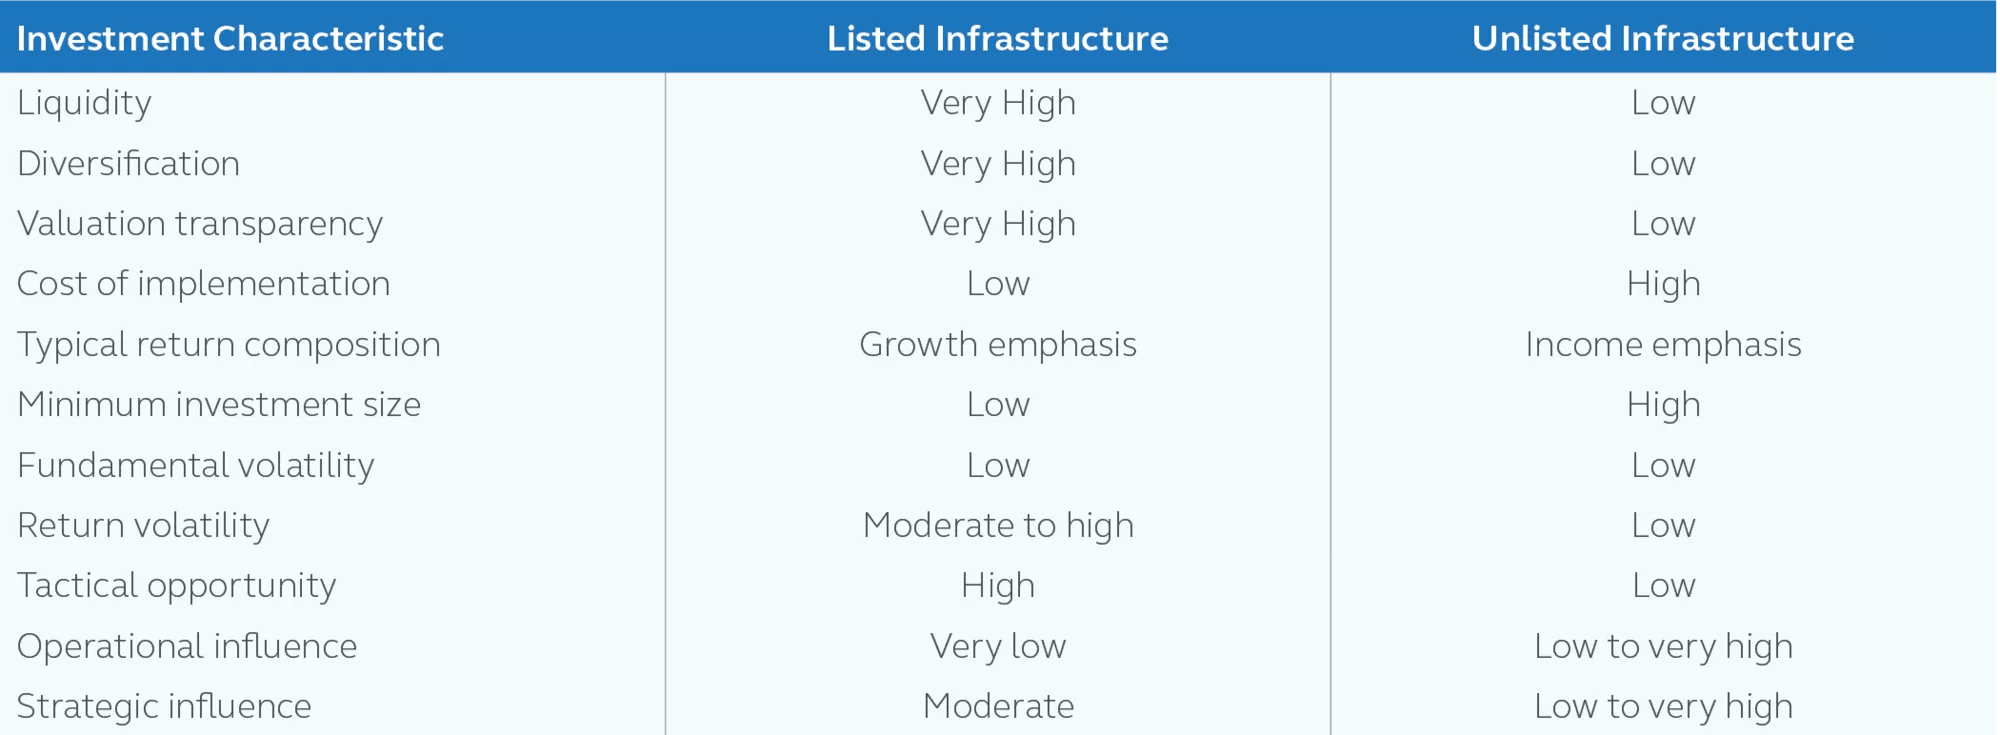 Table showing typical investment characteristics of listed and unlisted infrastructure